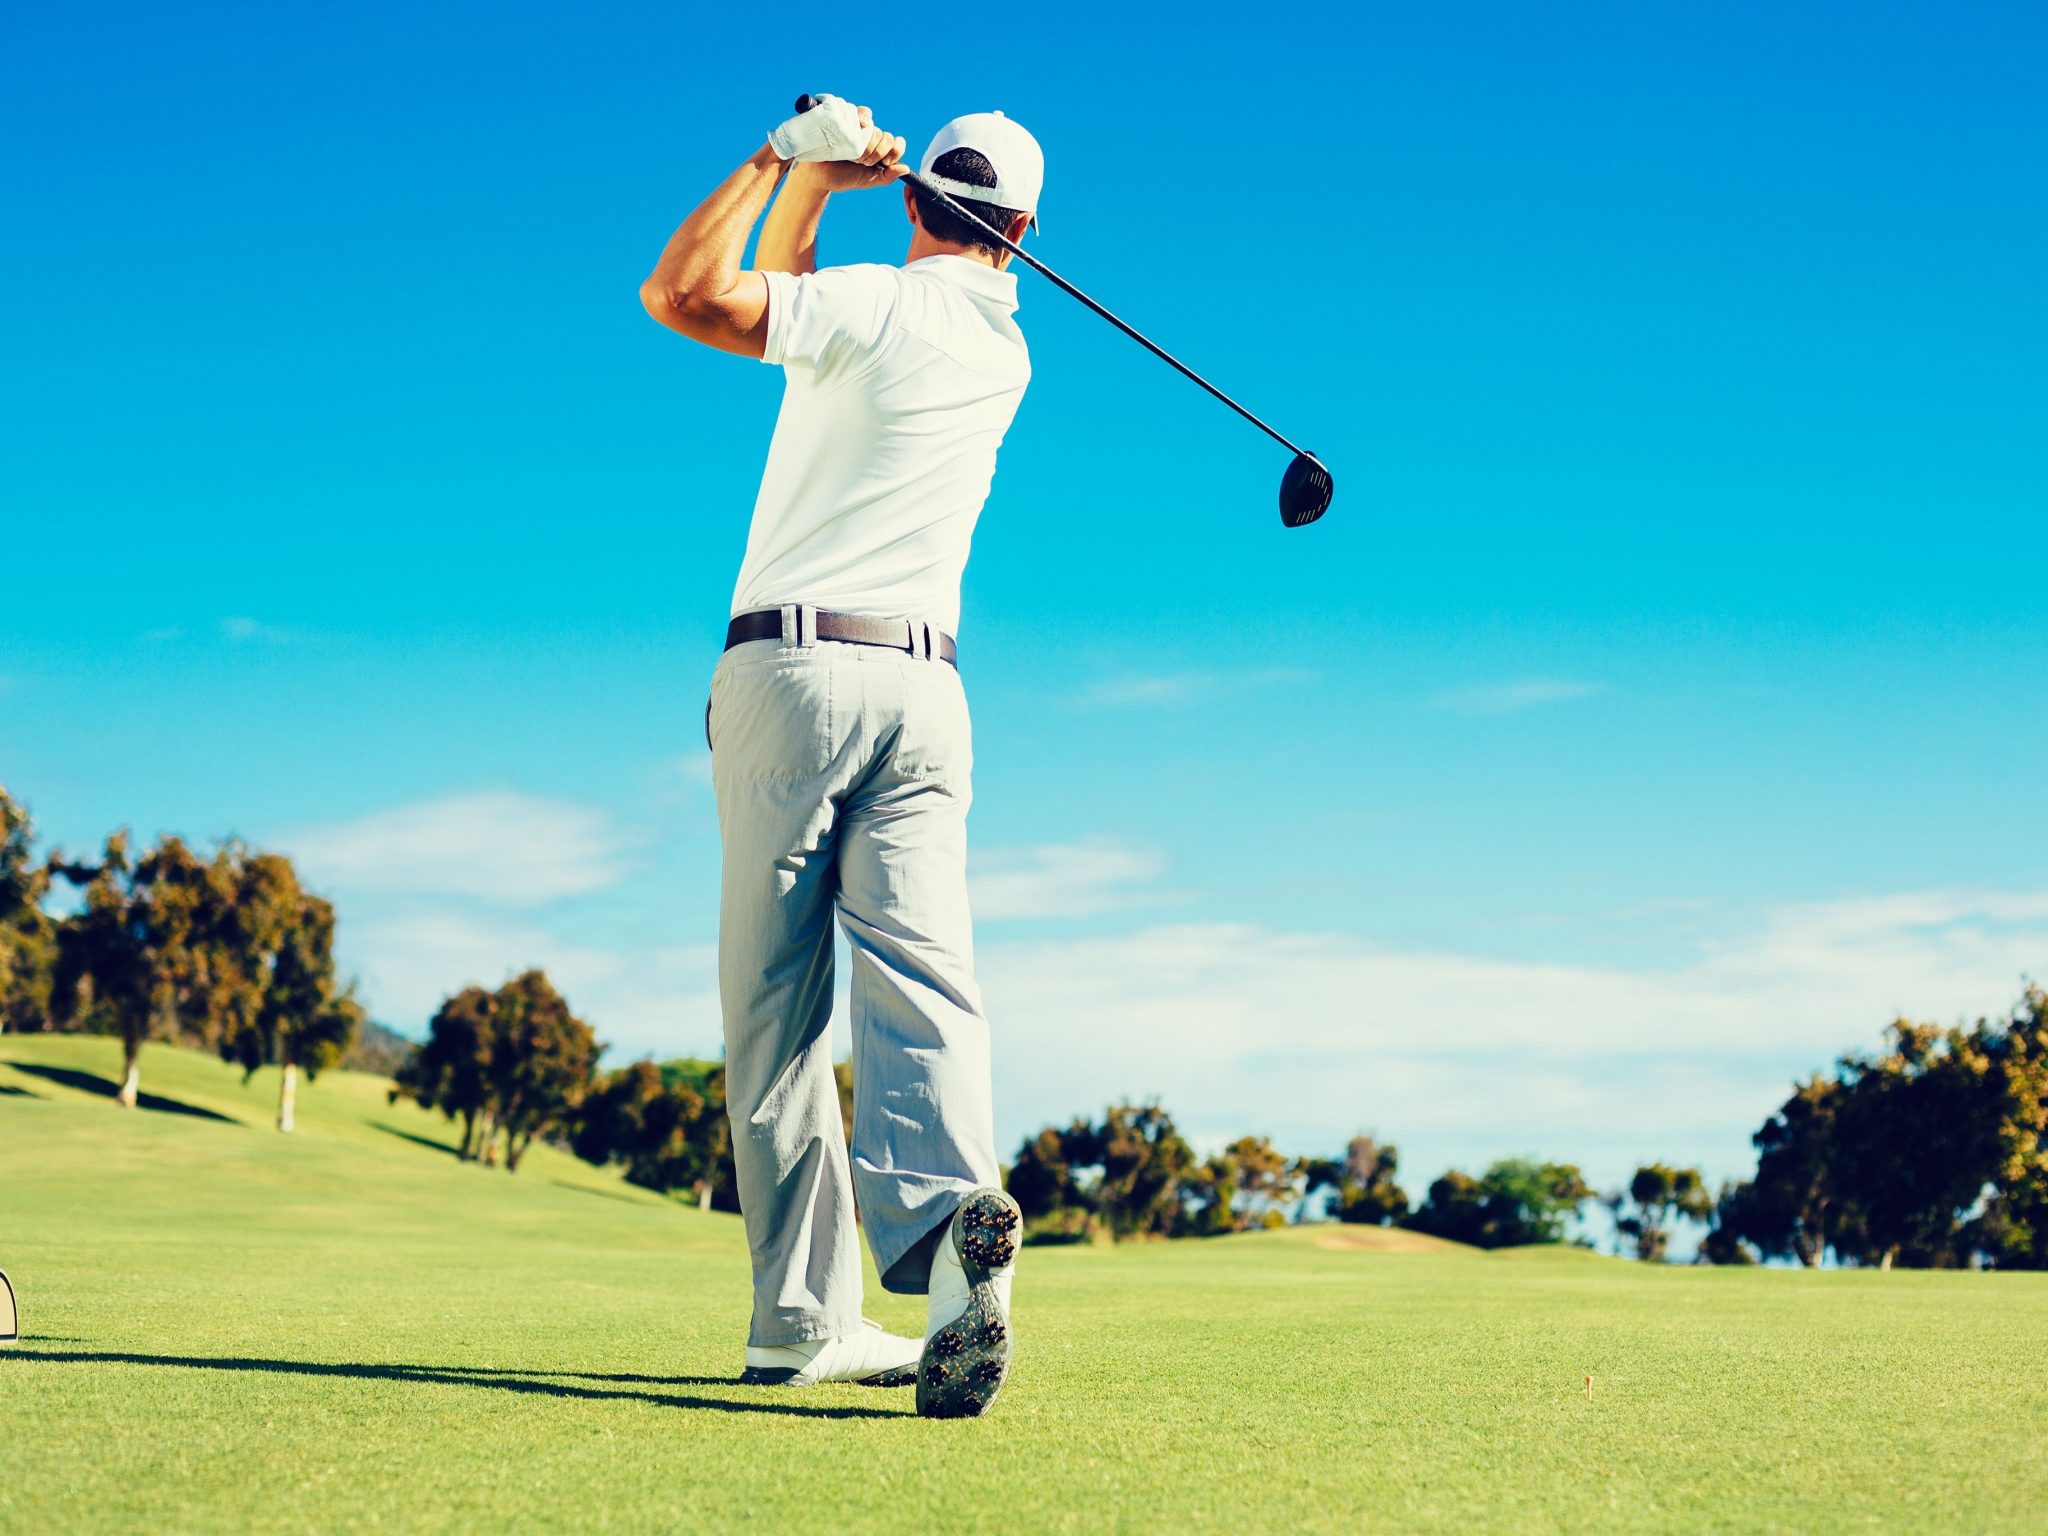 Typical golf injury - How to manage lower back pain - Perea Clinic